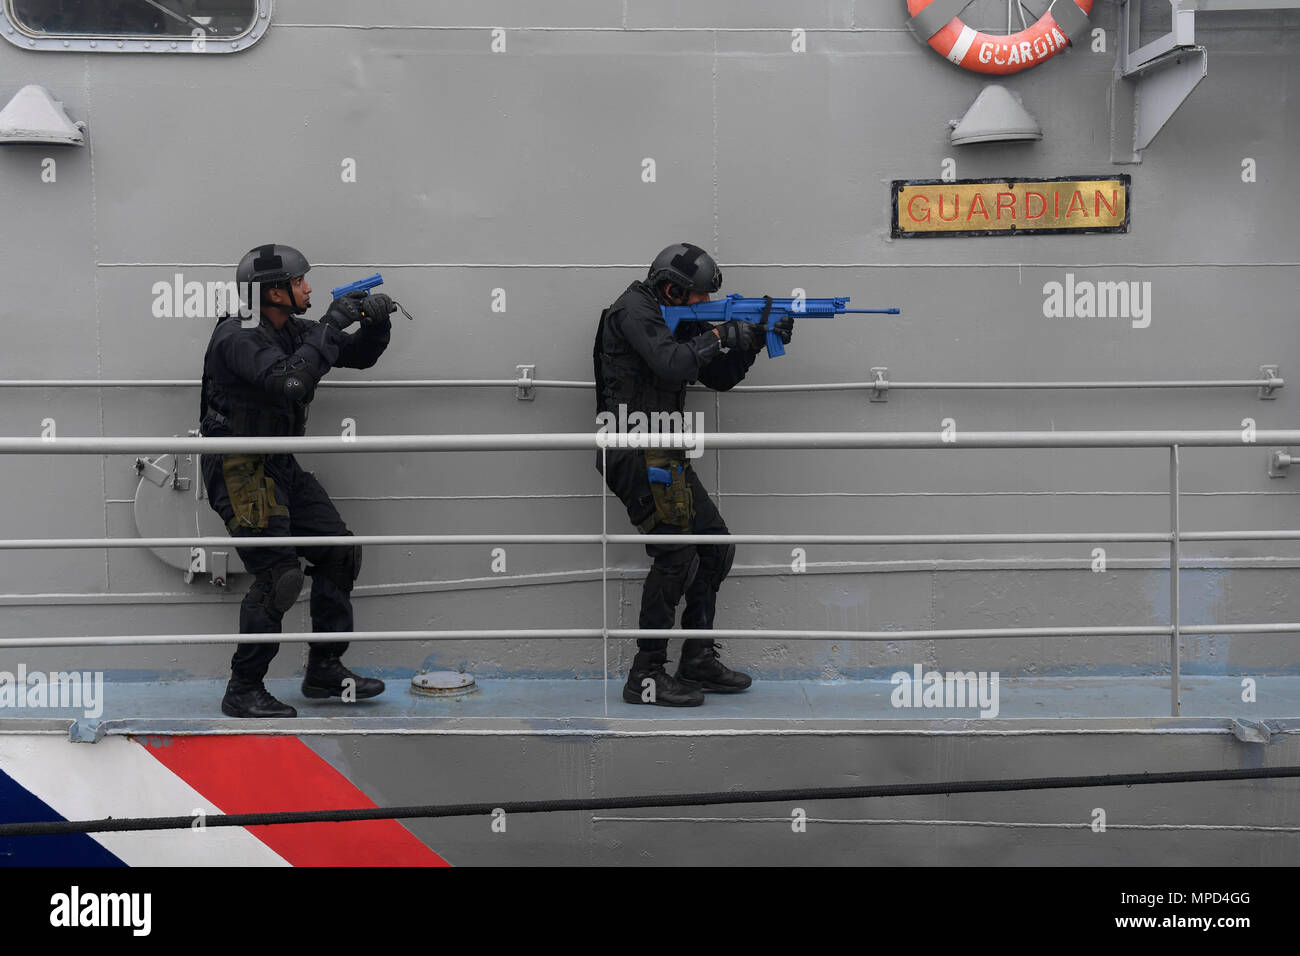 https://c8.alamy.com/comp/MPD4GG/mauritius-national-coast-guard-commandos-participate-in-visit-board-search-and-seizure-training-aboard-mauritius-coast-guard-ship-guardian-during-exercise-cutlass-express-2017-in-port-louis-mauritius-feb-5-2017-exercise-cutlass-express-2017-sponsored-by-us-africa-command-and-conducted-by-us-naval-forces-africa-is-designed-to-assess-and-improve-combined-maritime-law-enforcement-capacity-and-promote-national-and-regional-security-in-east-africa-us-navy-photo-by-mass-communication-specialist-1st-class-justin-stumberg-MPD4GG.jpg